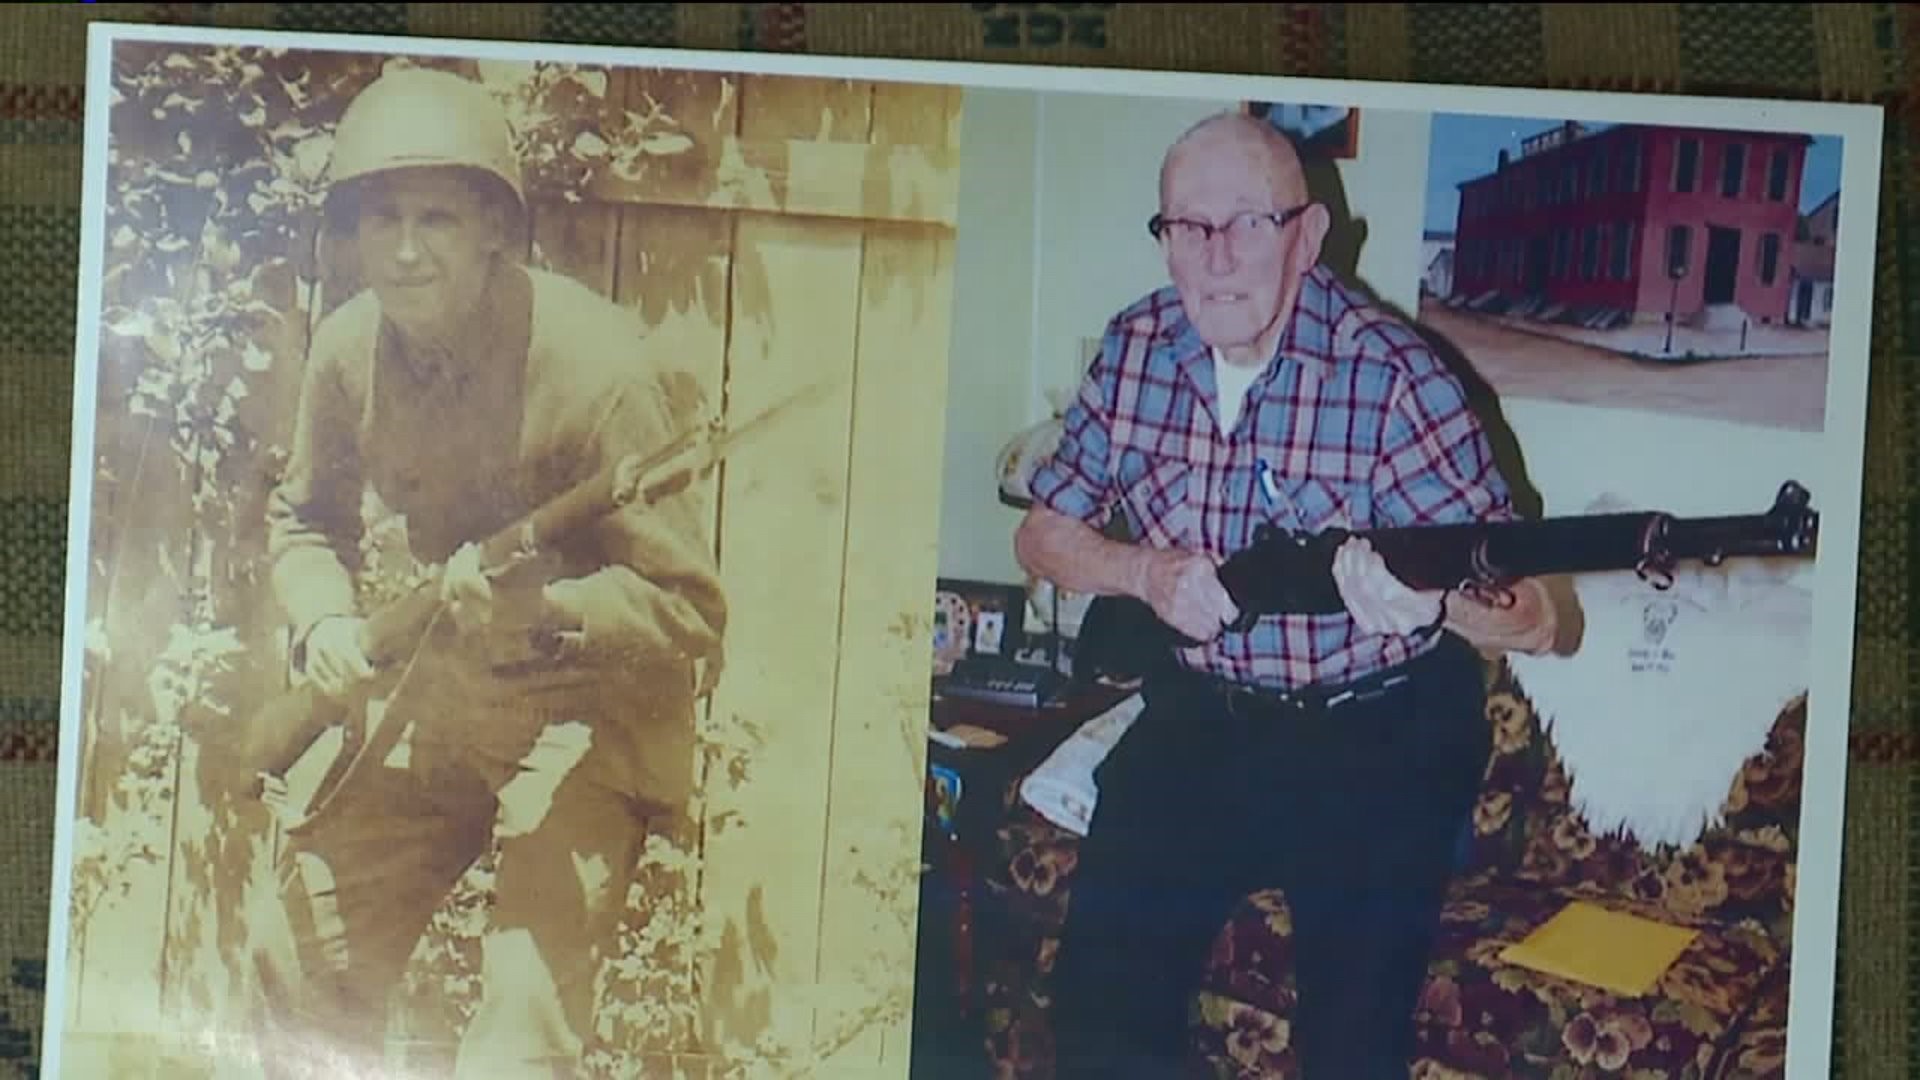 75 years later, WWII Vet Tells His Story